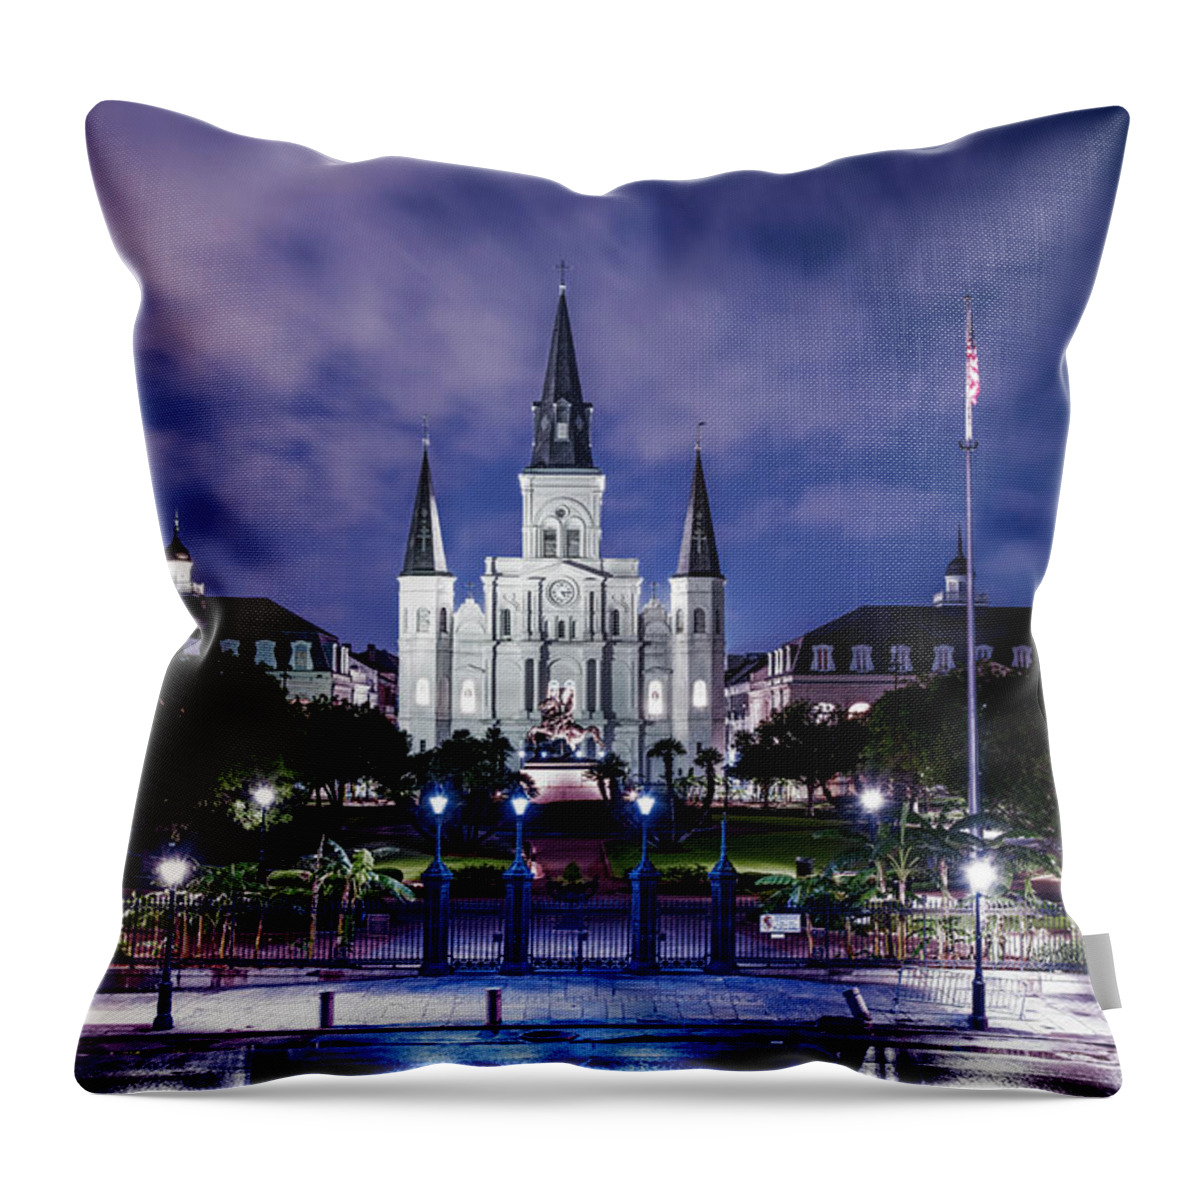 Louisiana Throw Pillow featuring the photograph Jackson Square Night Lights by Andy Crawford